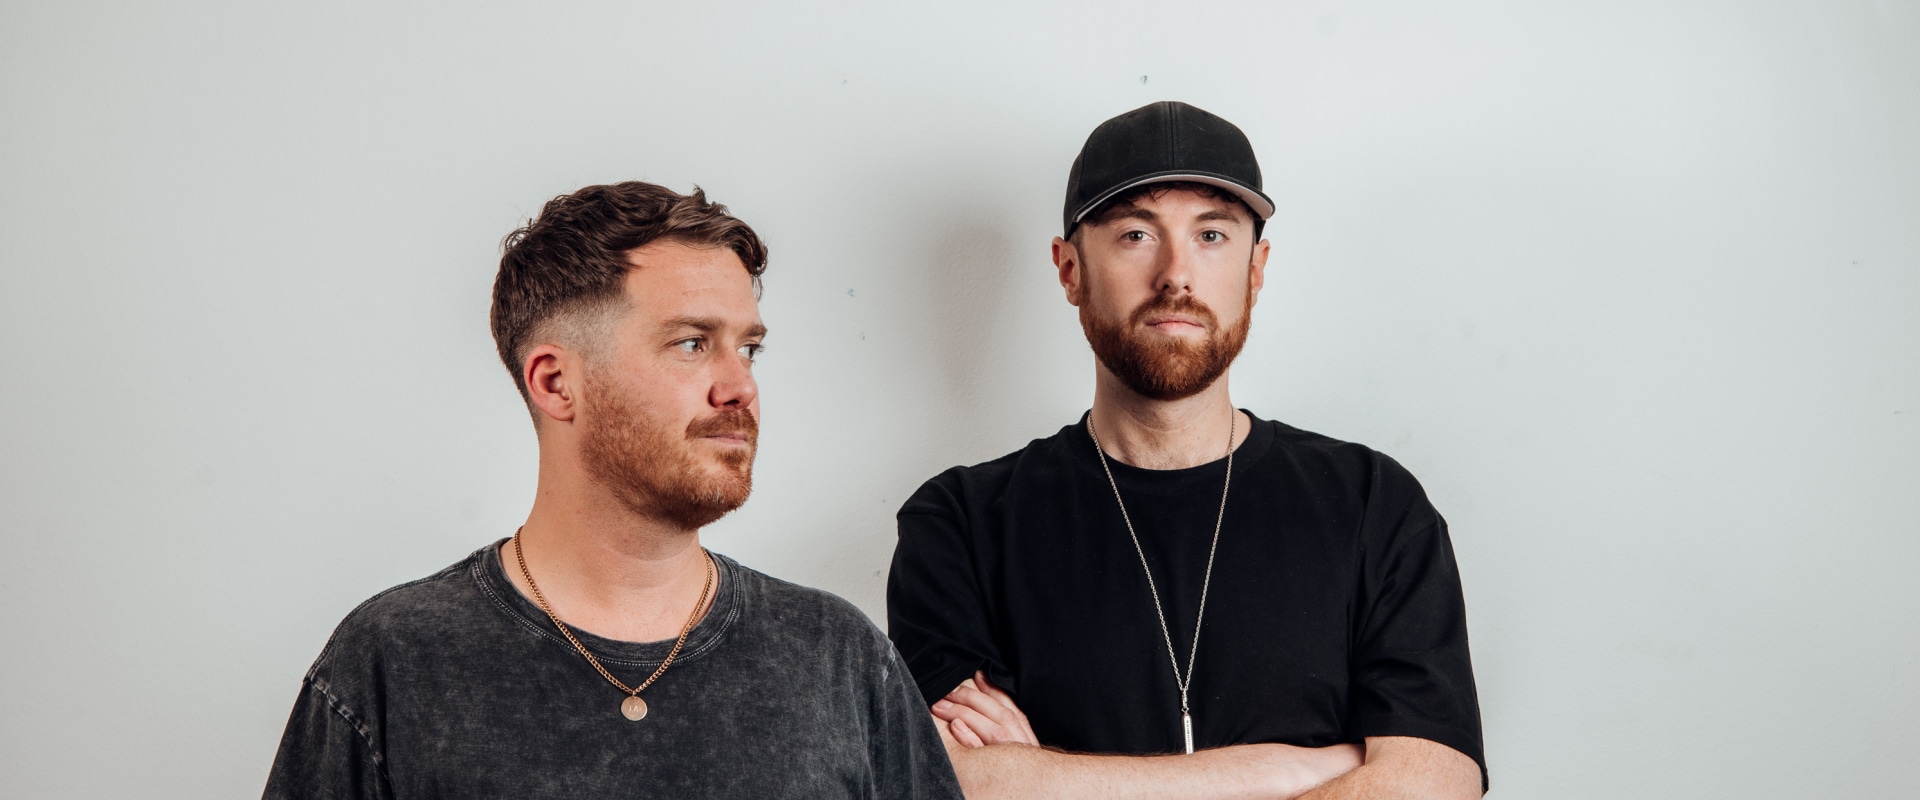 A Complete Overview of Gorgon City: The Rising House Music Duo